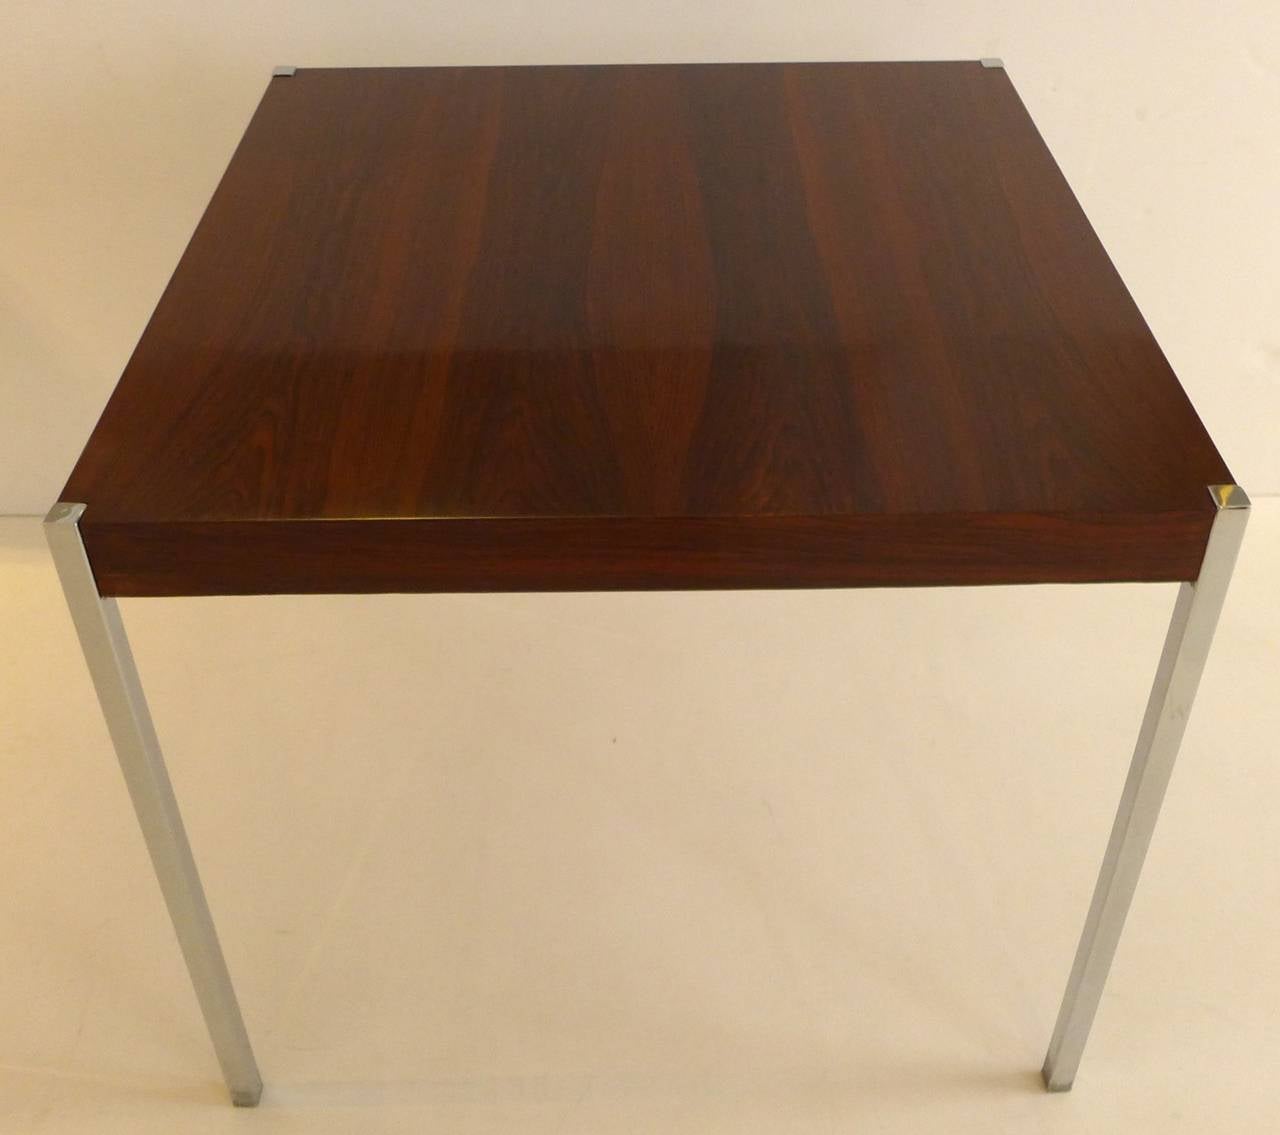 Square dining or dinette table in boldly figured rosewood with flush mirror chrome corner legs. Designed by Harvey Probber and made by Probber, circa 1960s. In beautiful refinished condition.